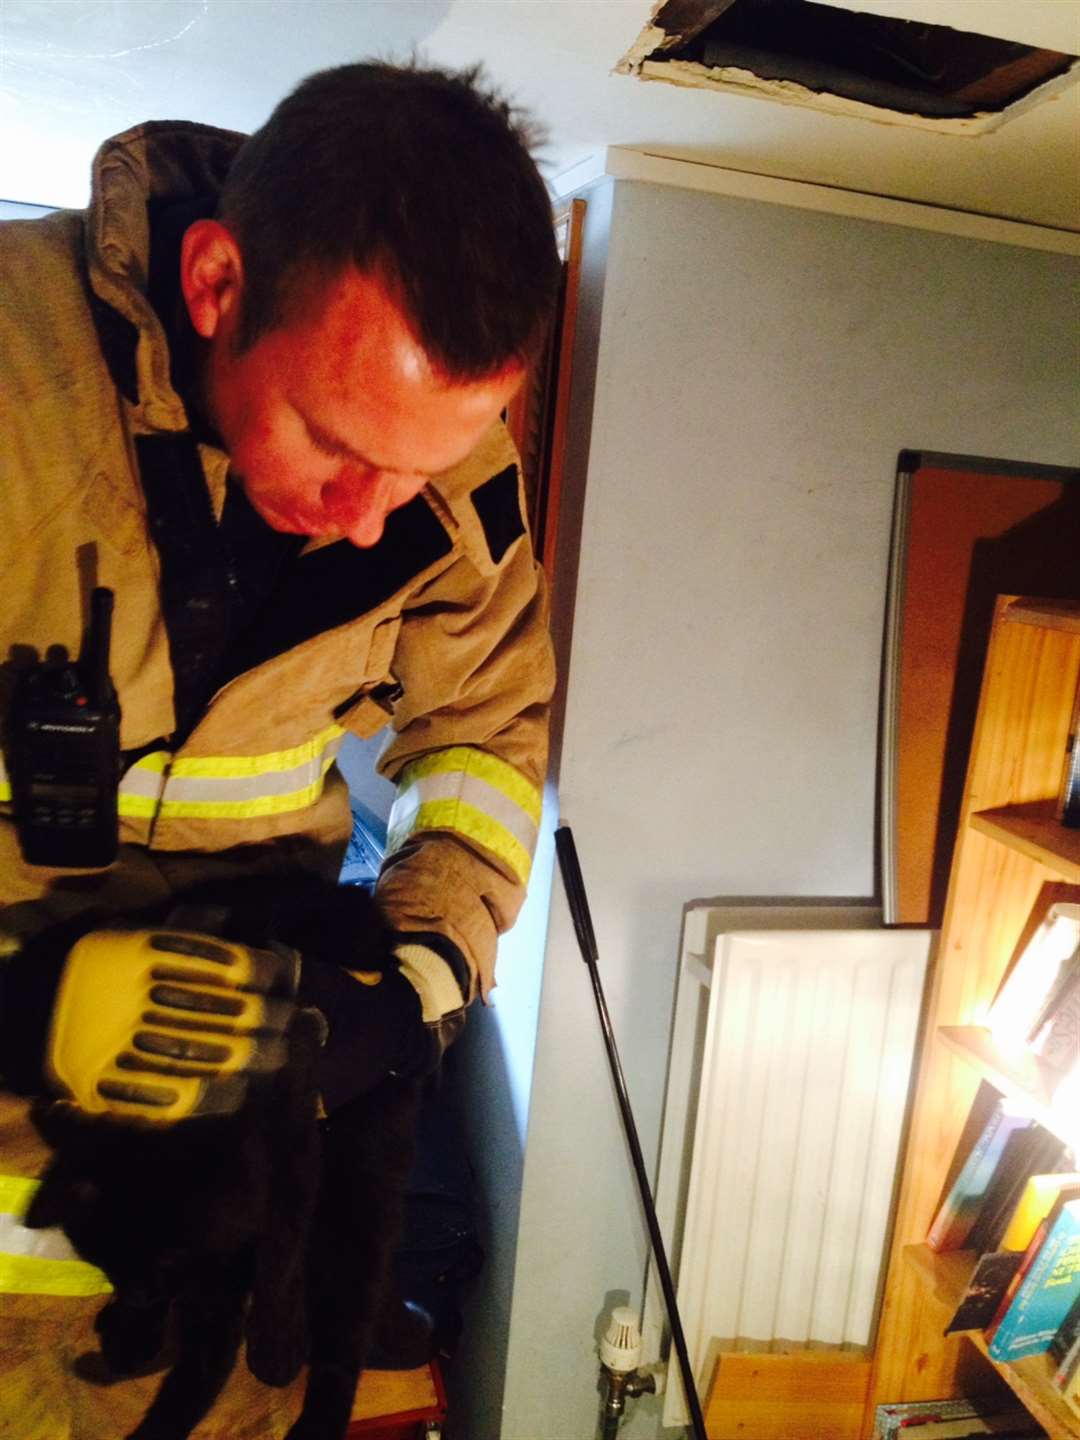 Cougar the cat was rescued by firefighters